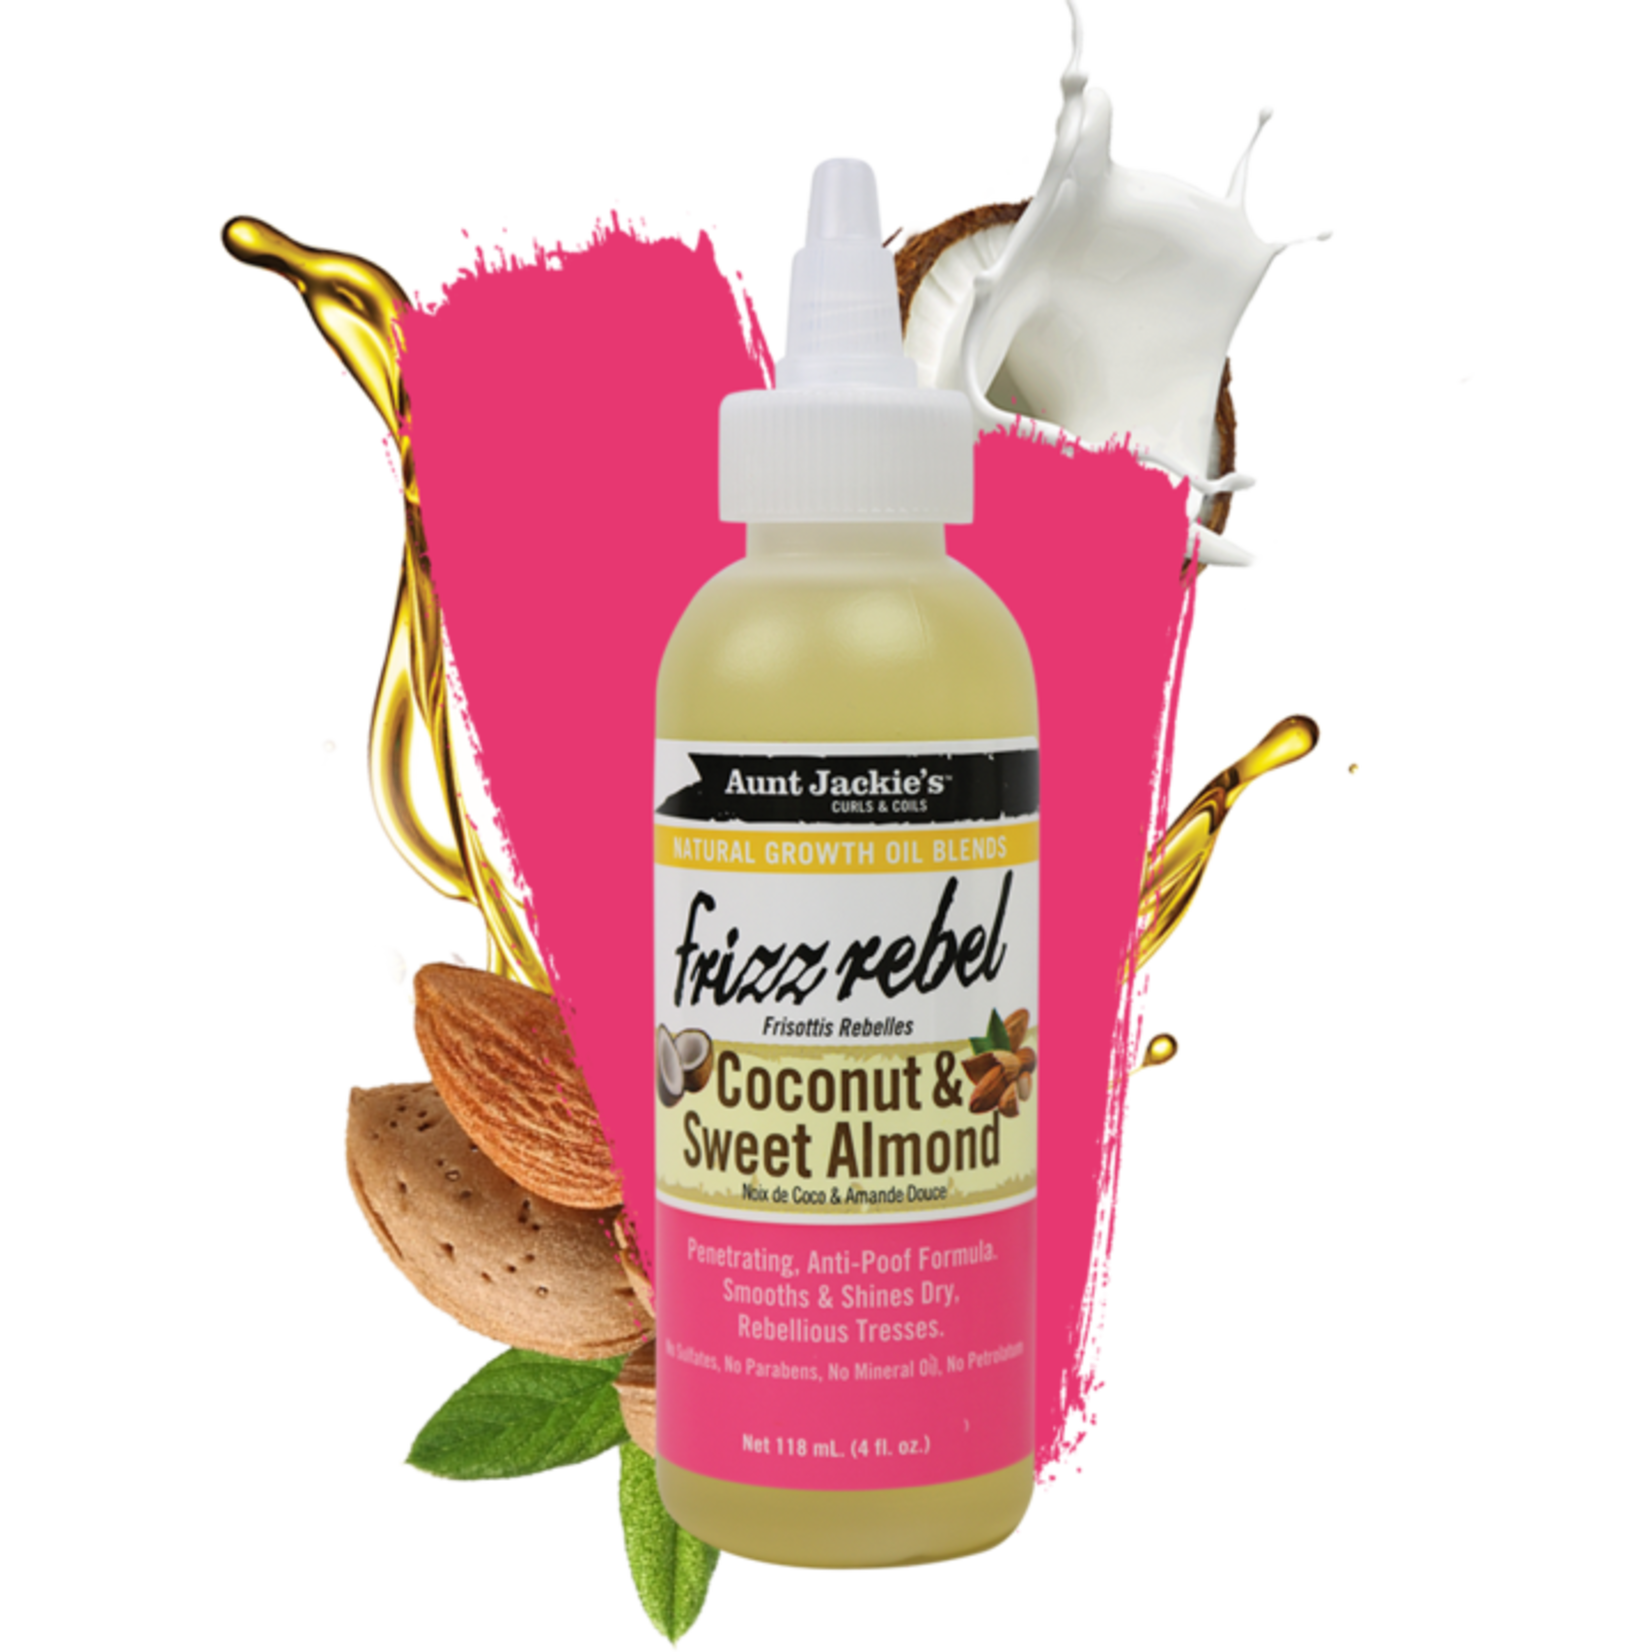 Aunt Jackie's Frizz Rebel Natural  Growth Oil